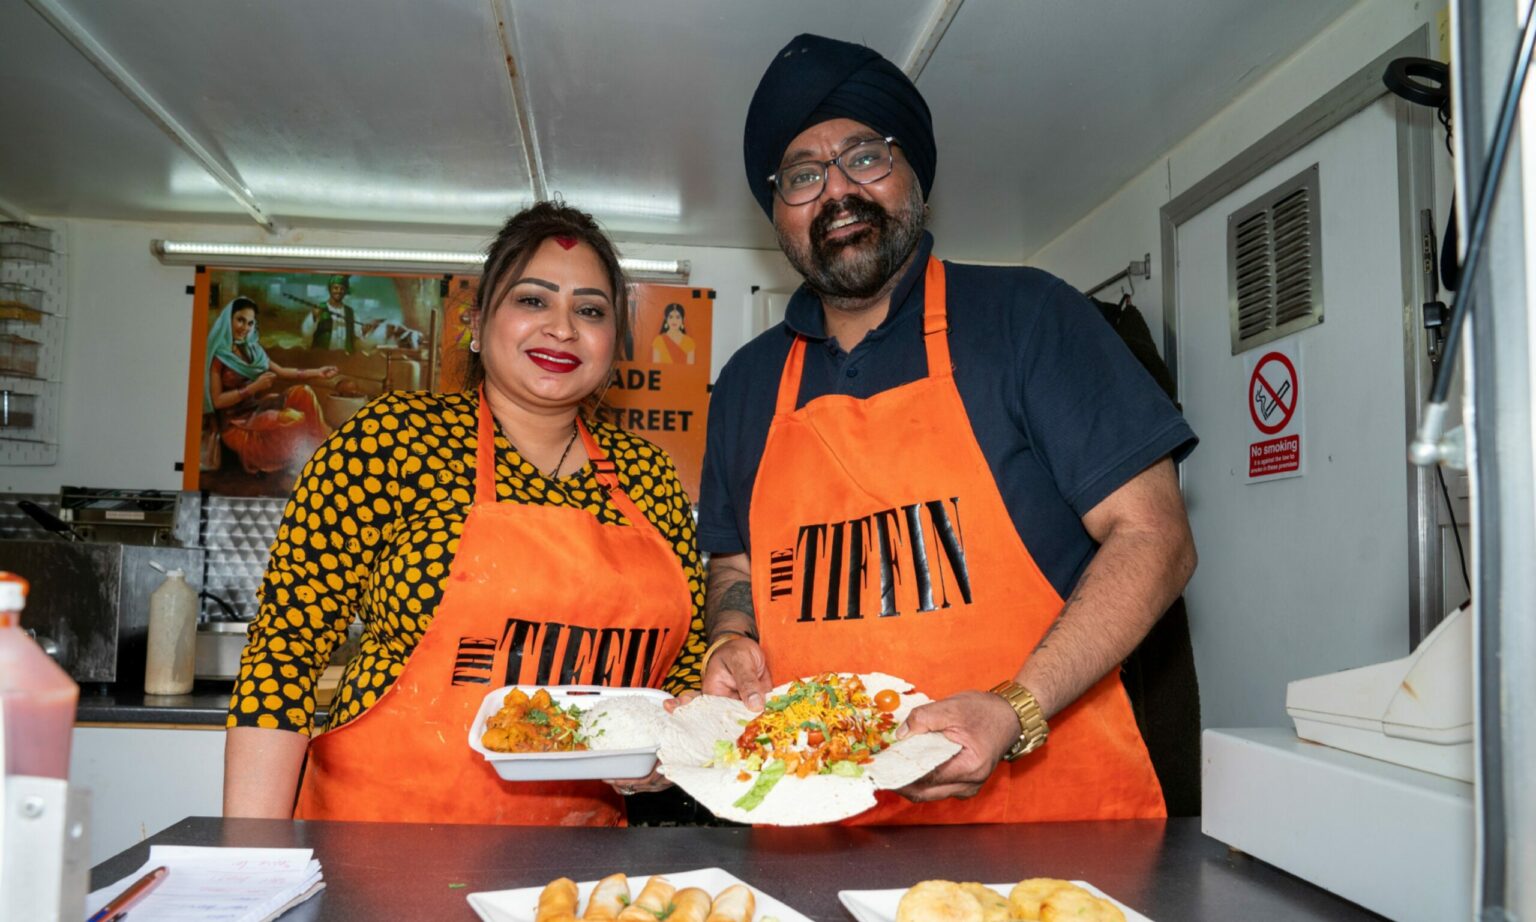 Tony and Priya in orange Tiffin aprons in a kitchen, smiling. Priya holds curry and rice, and Tony holds a large open flatbread with pakoras and salad.